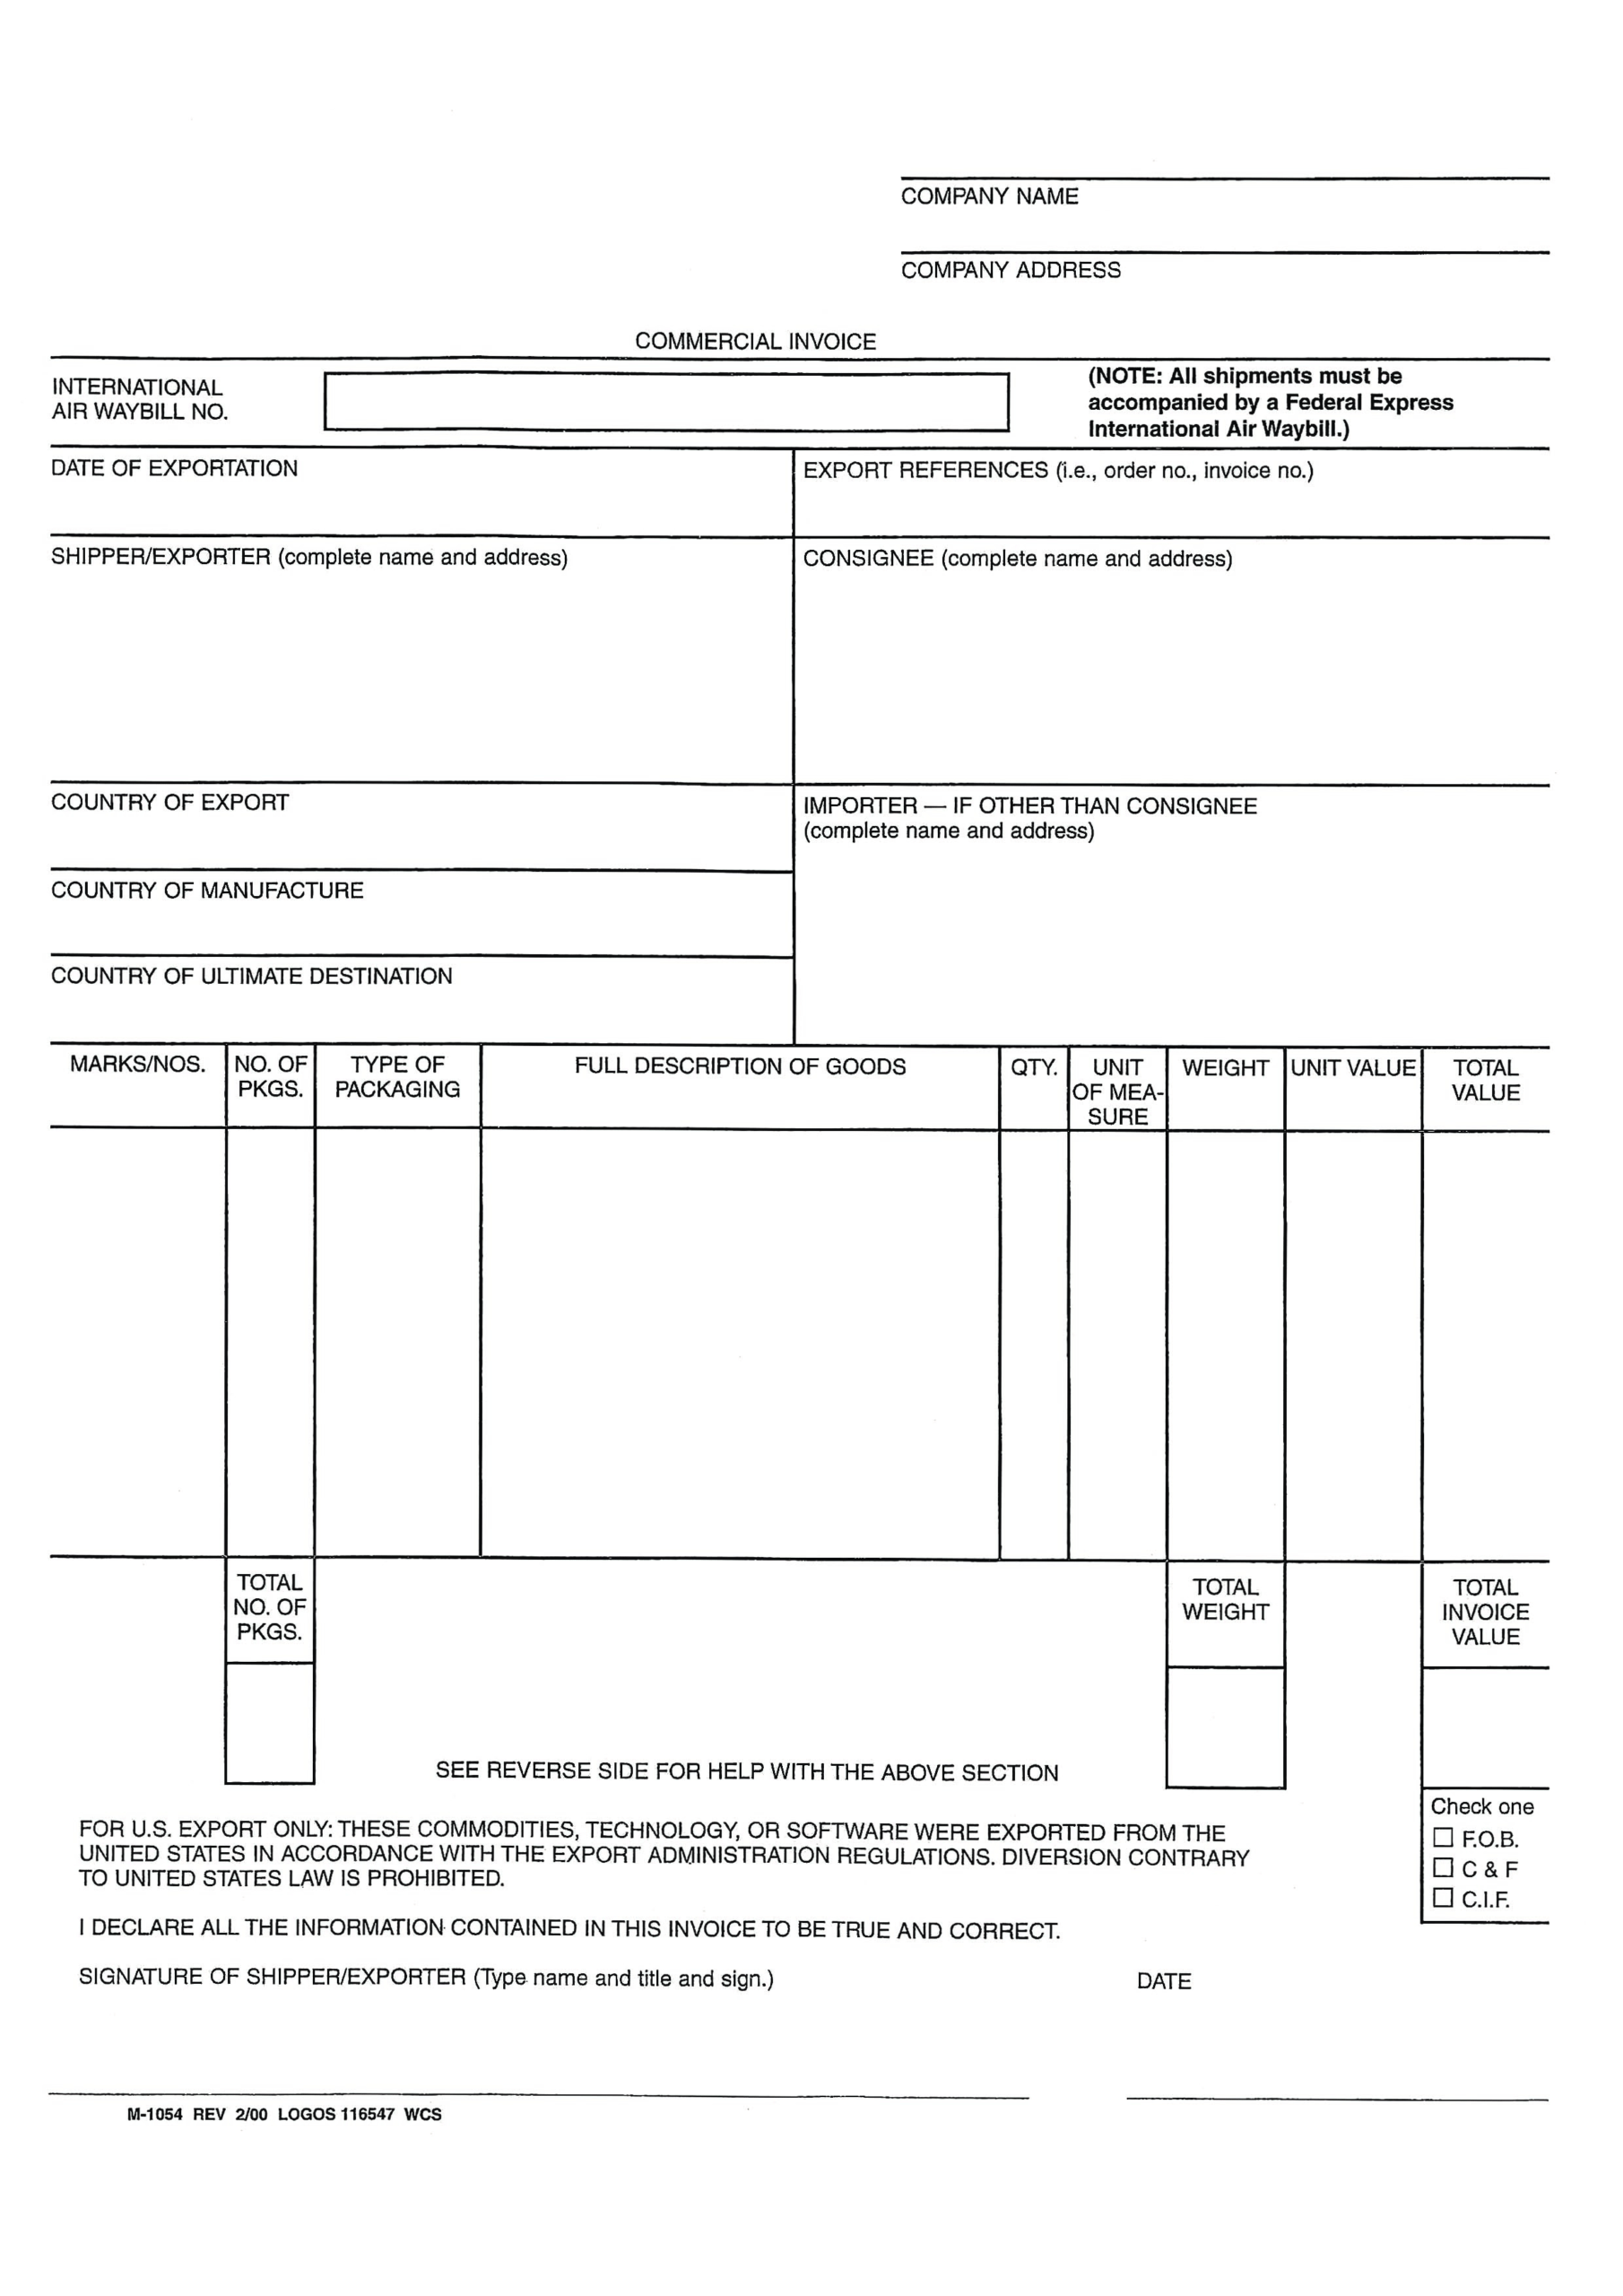 Blank Commercial Invoice Word | Templates At Inside Commercial Invoice Template Word Doc